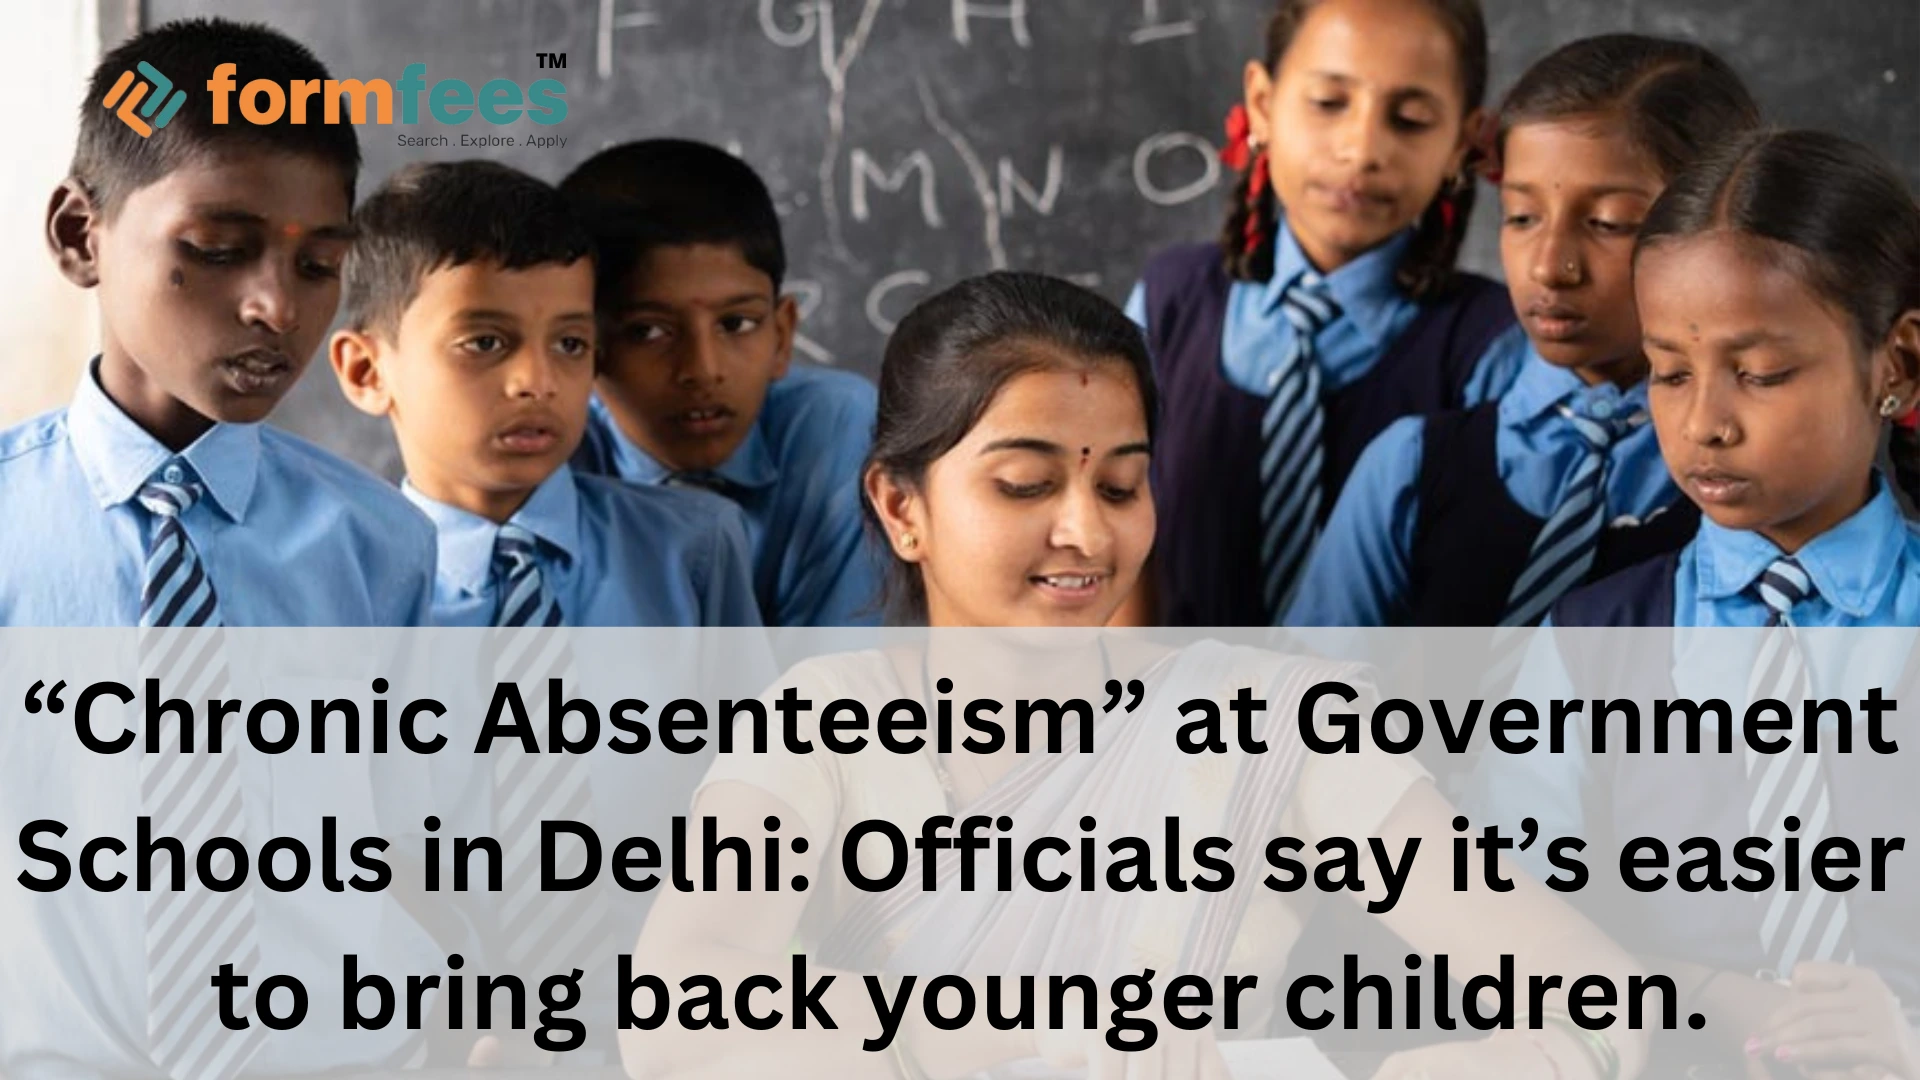 “Chronic Absenteeism” at Government Schools in Delhi Officials say it’s easier to bring back younger children.